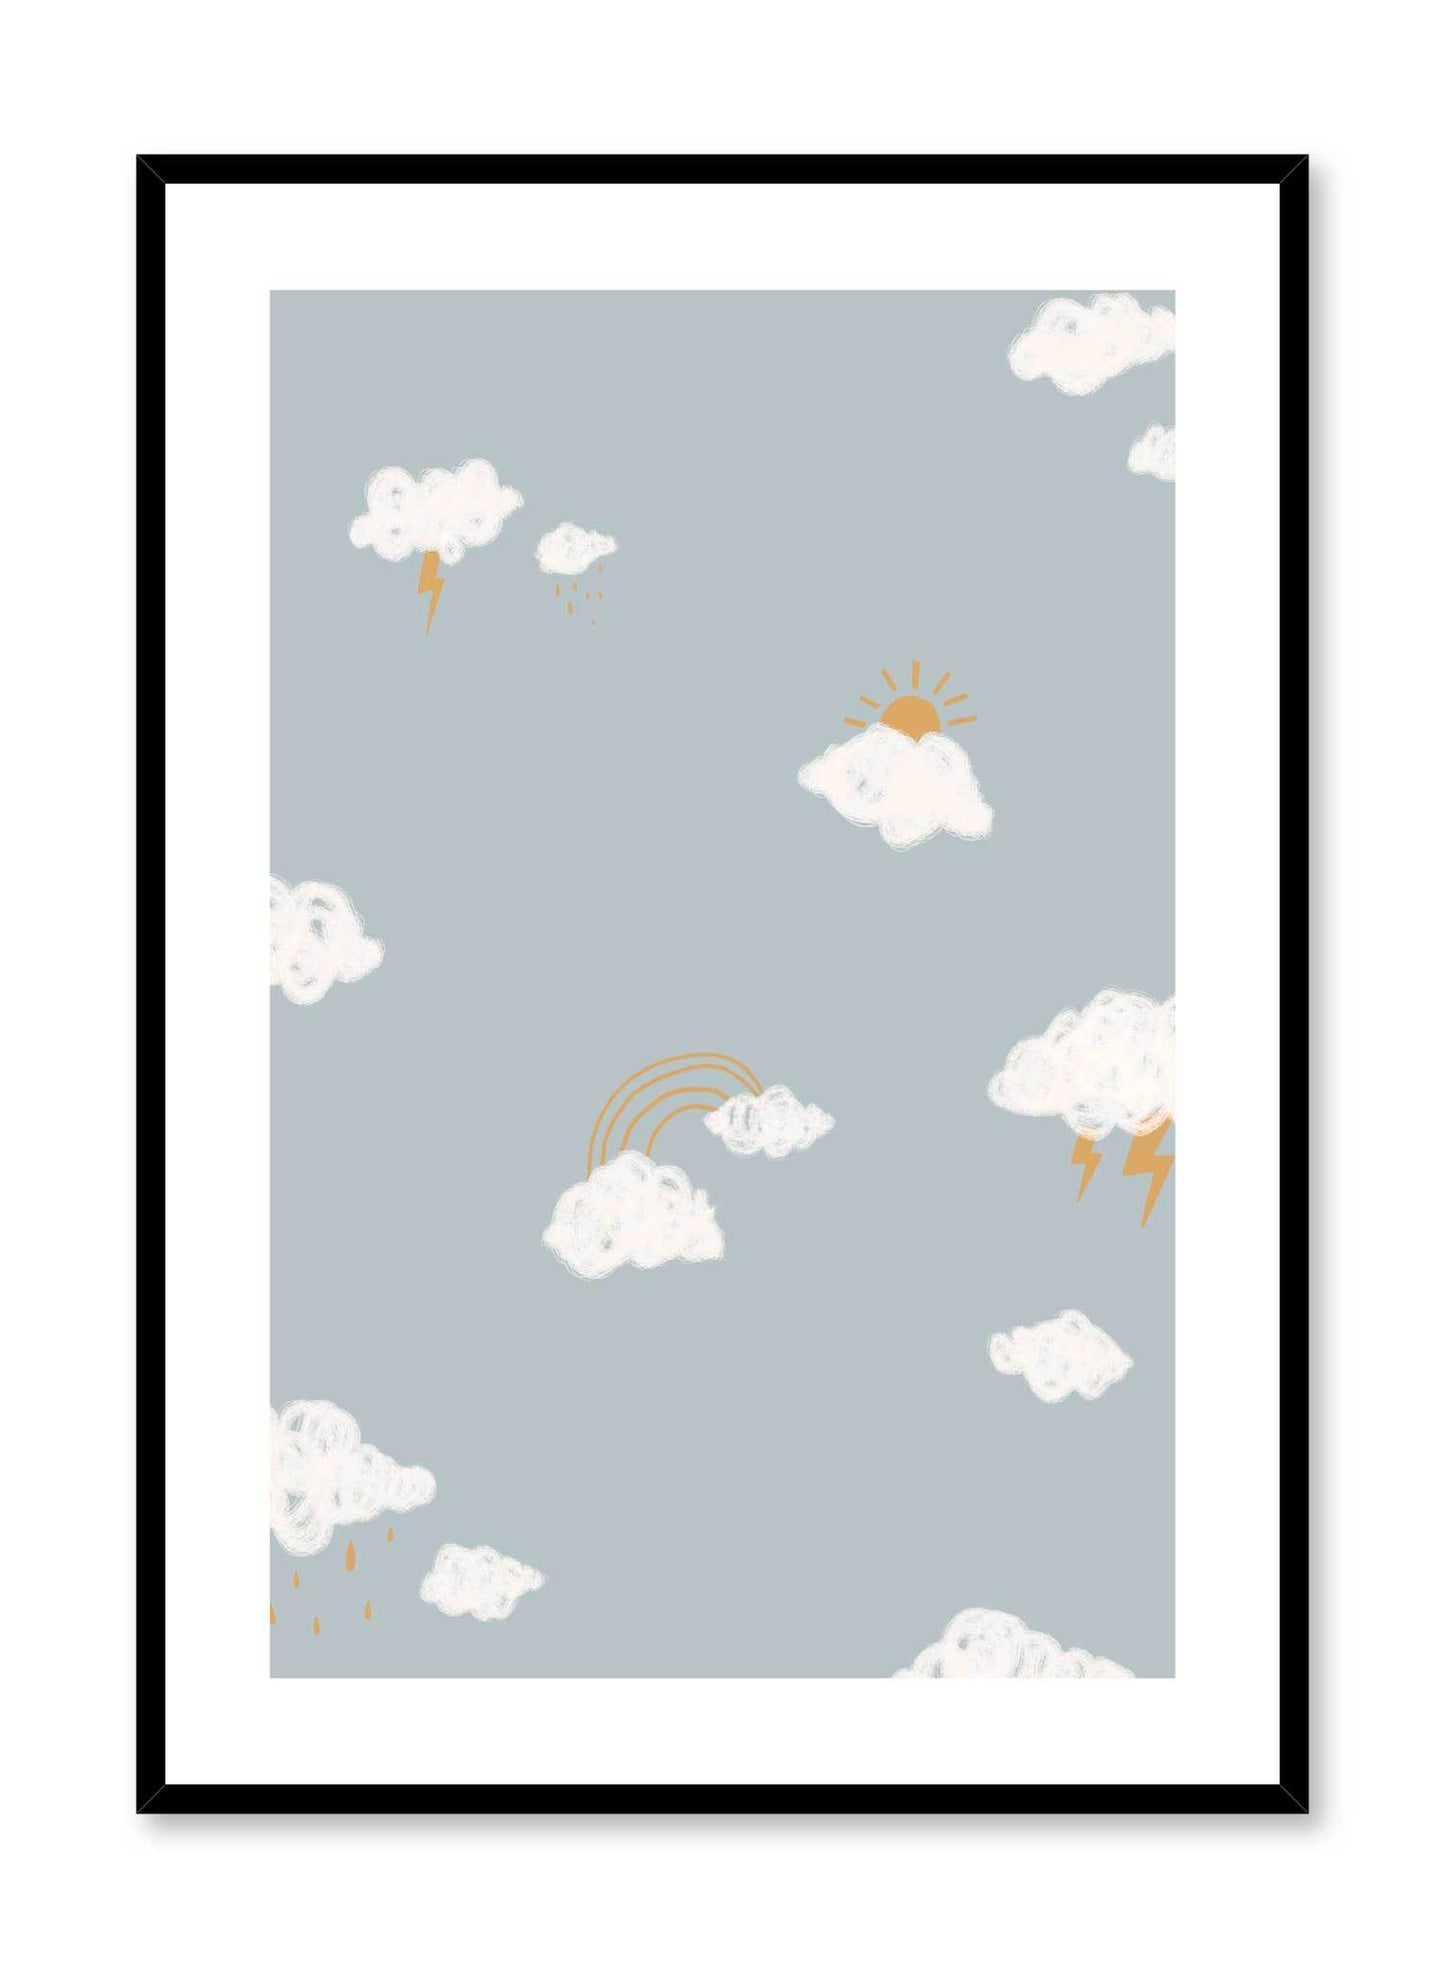 Joyful Sky is a minimalist illustration by Opposite Wall of a sky filled with clouds of different weathers such as sun, rain and thunderstorm.